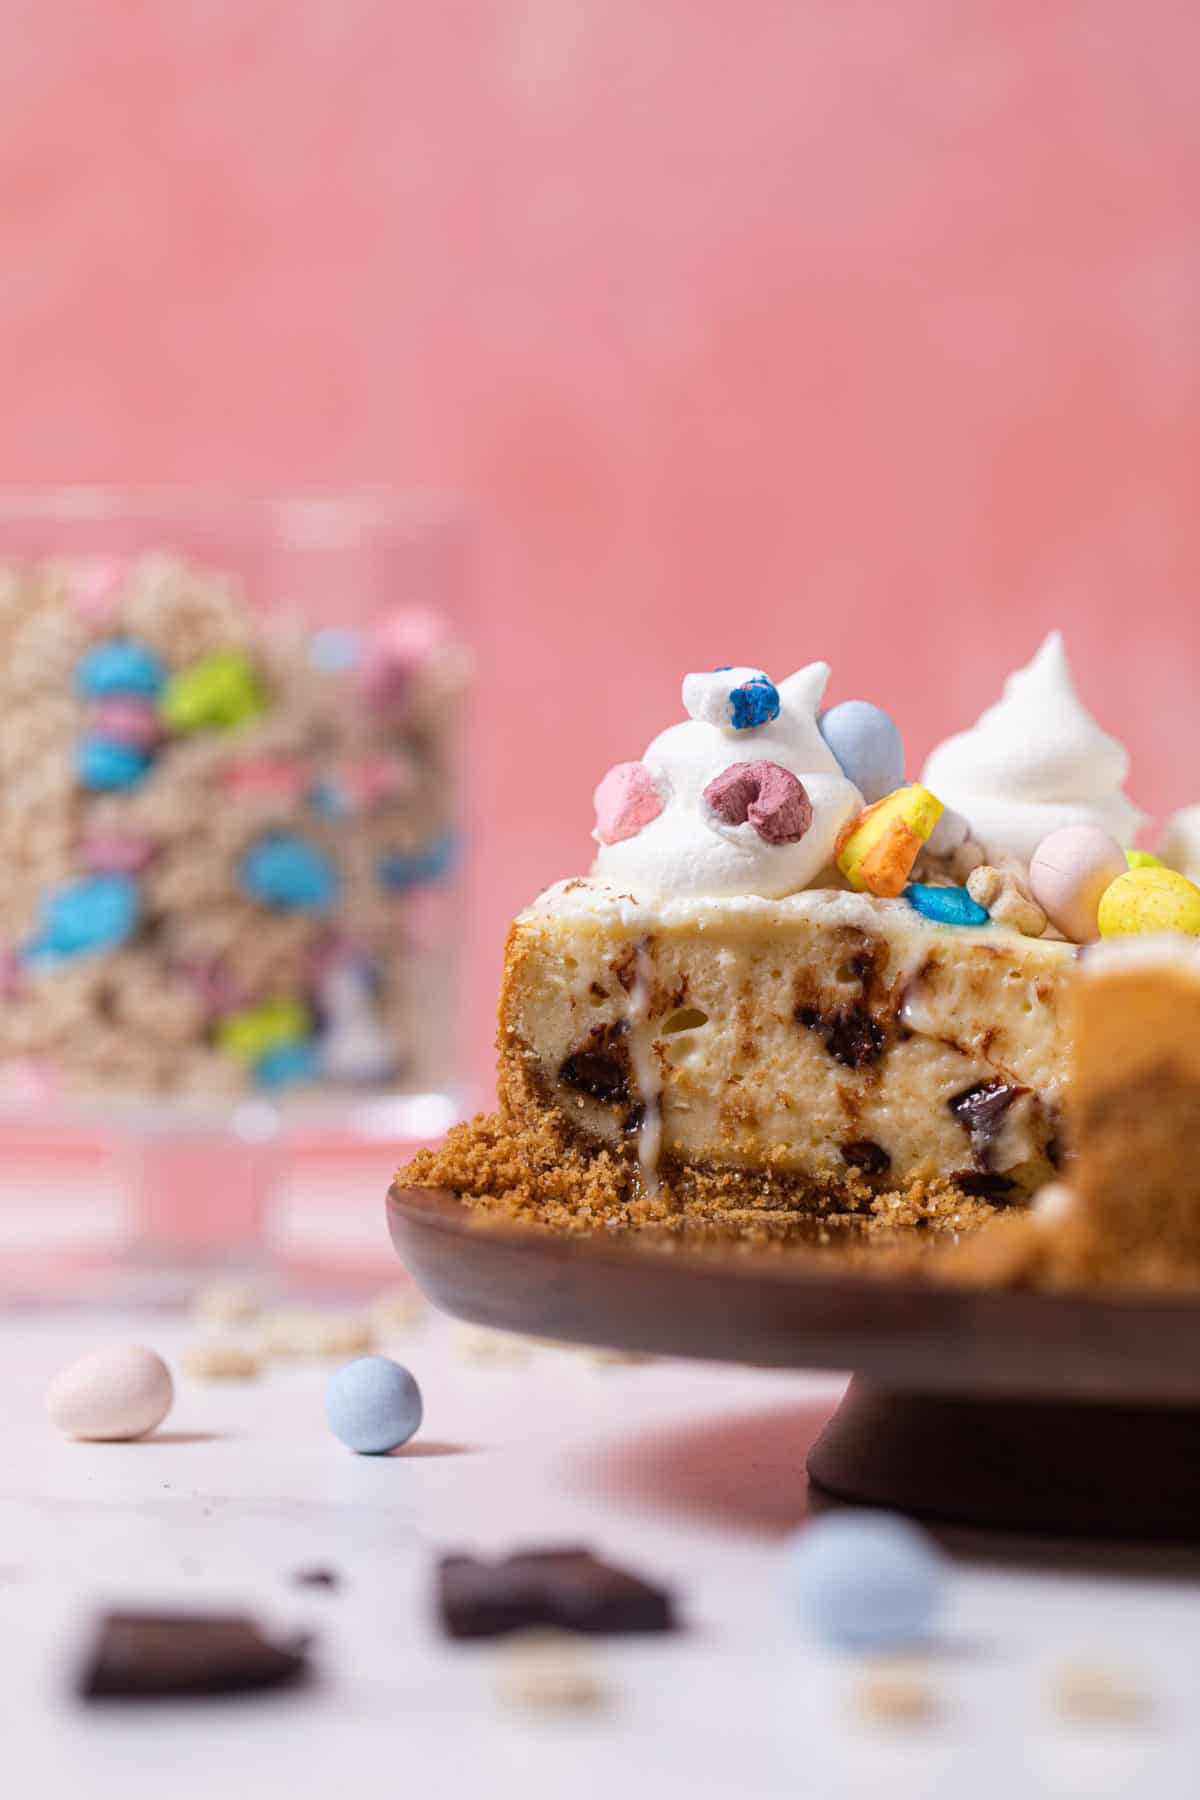 Chocolate Chip Lucky Charms Cheesecake missing a slice.